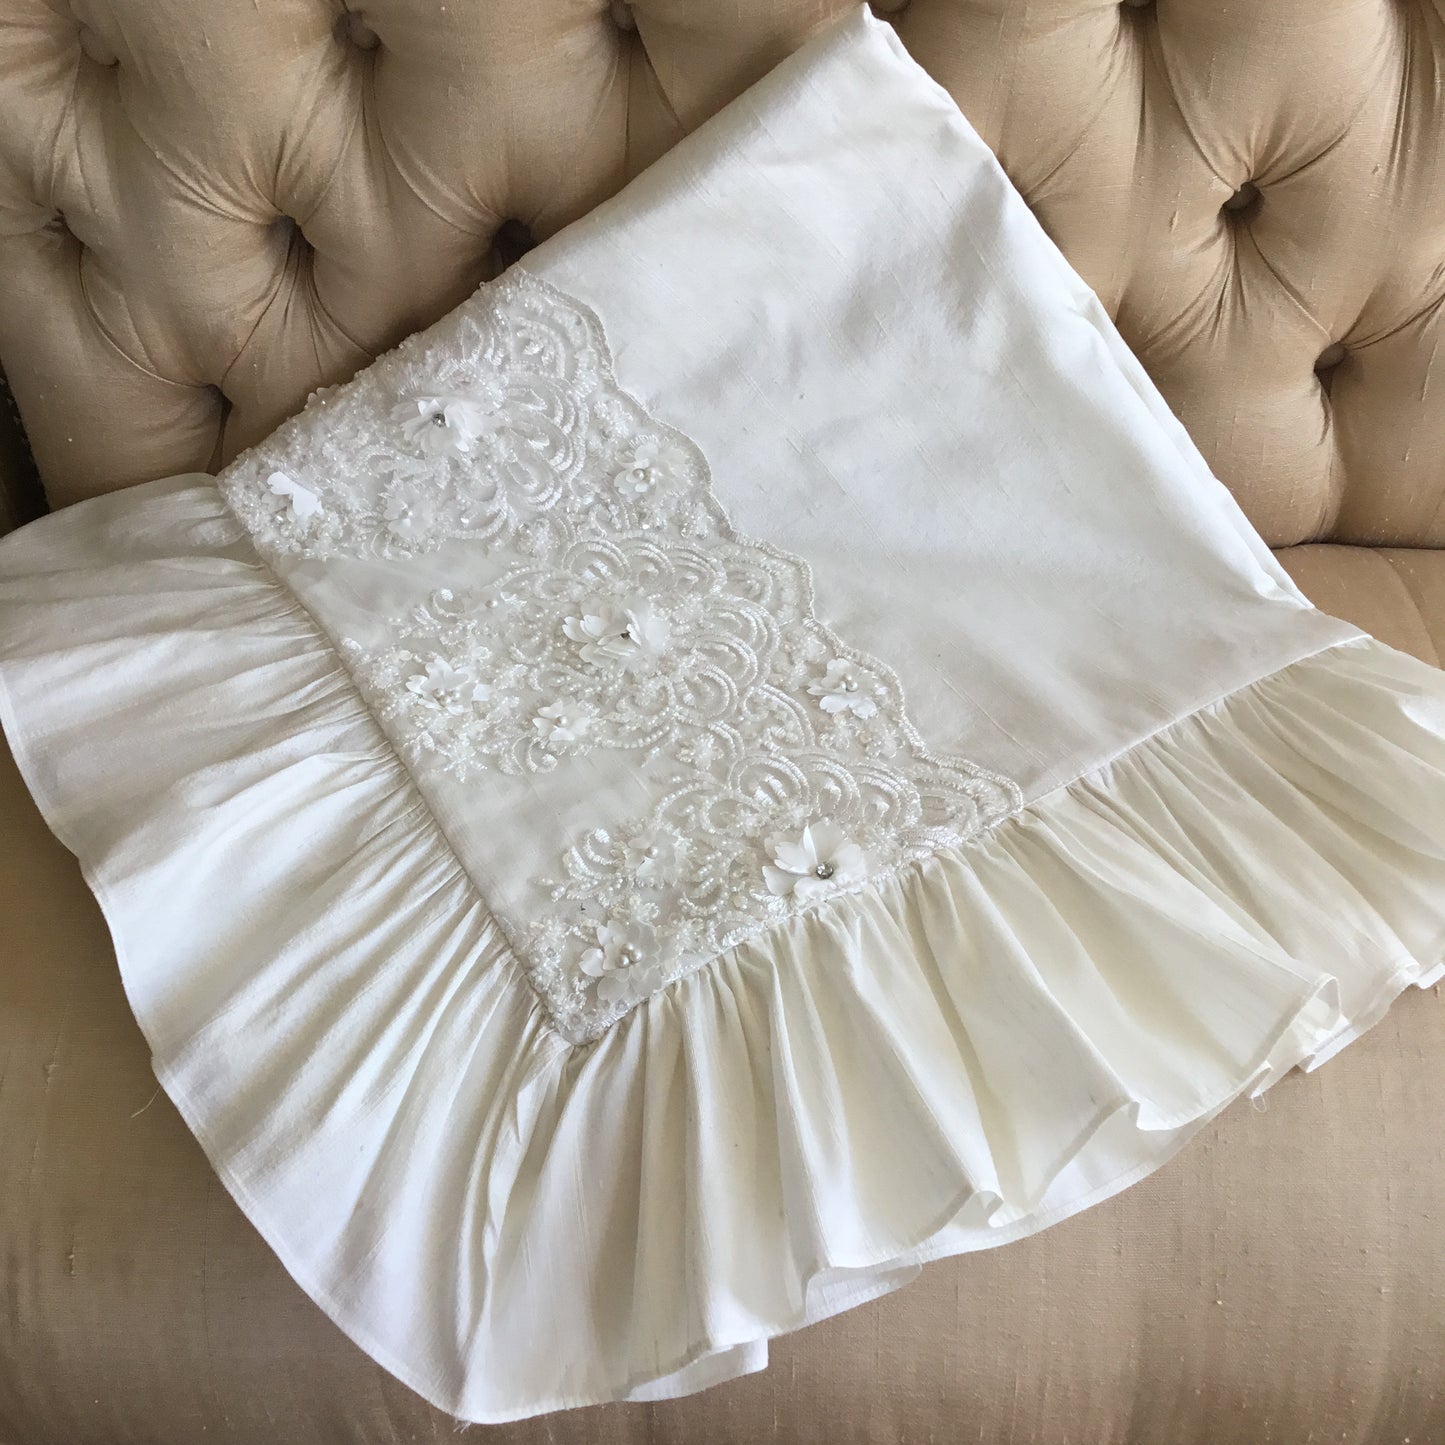 Heirloom Lace Christening Gown - Dior